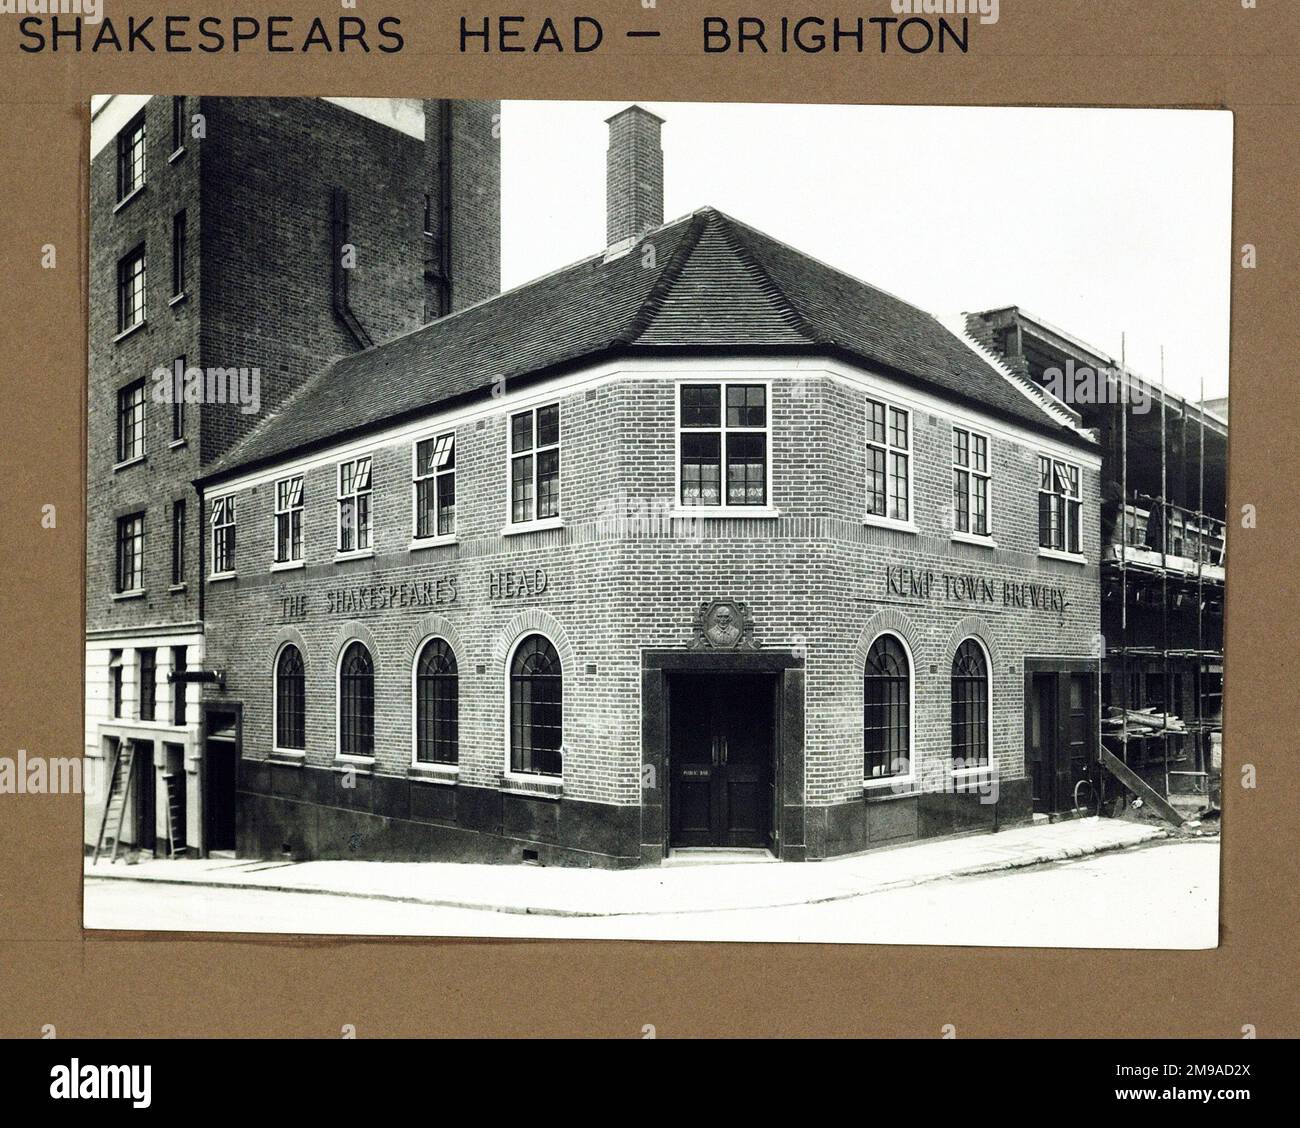 Photograph of Shakespeares Head PH, Brighton, Sussex. The main side of the print (shown here) depicts: Corner on view of the pub.  The back of the print (available on request) details: Nothing for the Shakespeares Head, Brighton, Sussex BN1 3TP. As of July 2018 . Drinkinbrighton Stock Photo